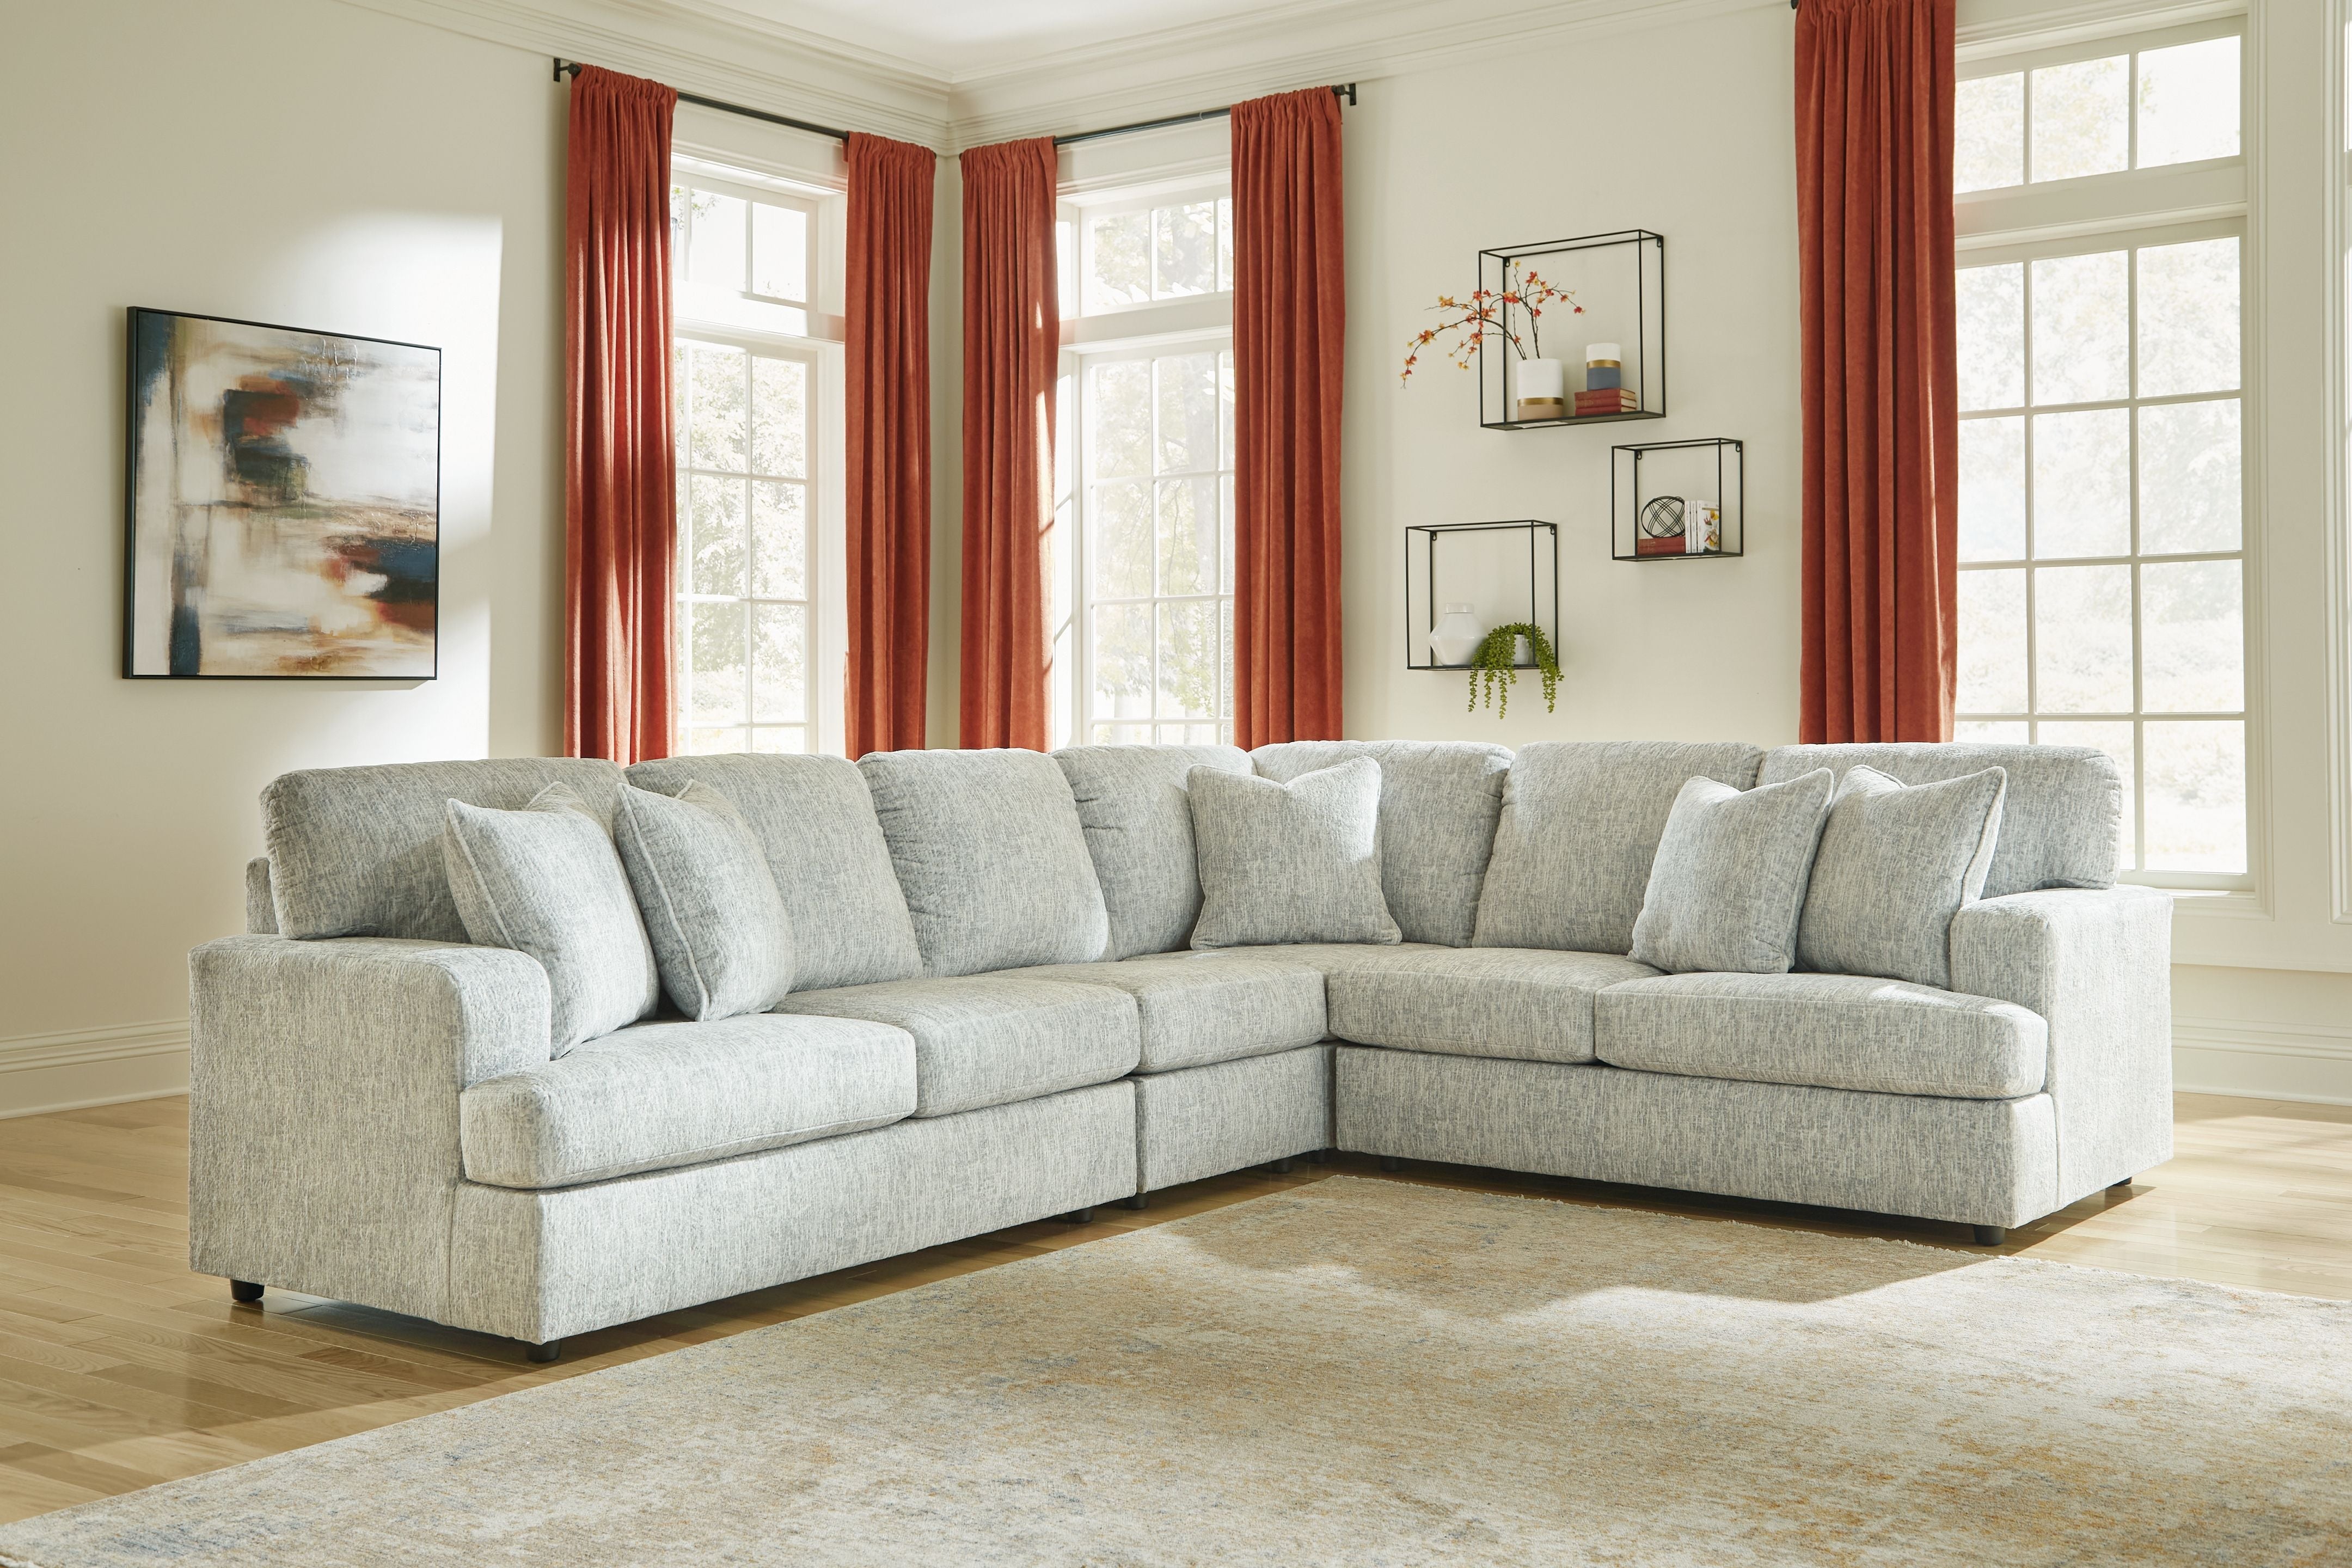 Signature Design by Ashley Playwrite Loveseat Gray Sectional - Comfy, Modern Design-Stationary Sectionals-American Furniture Outlet